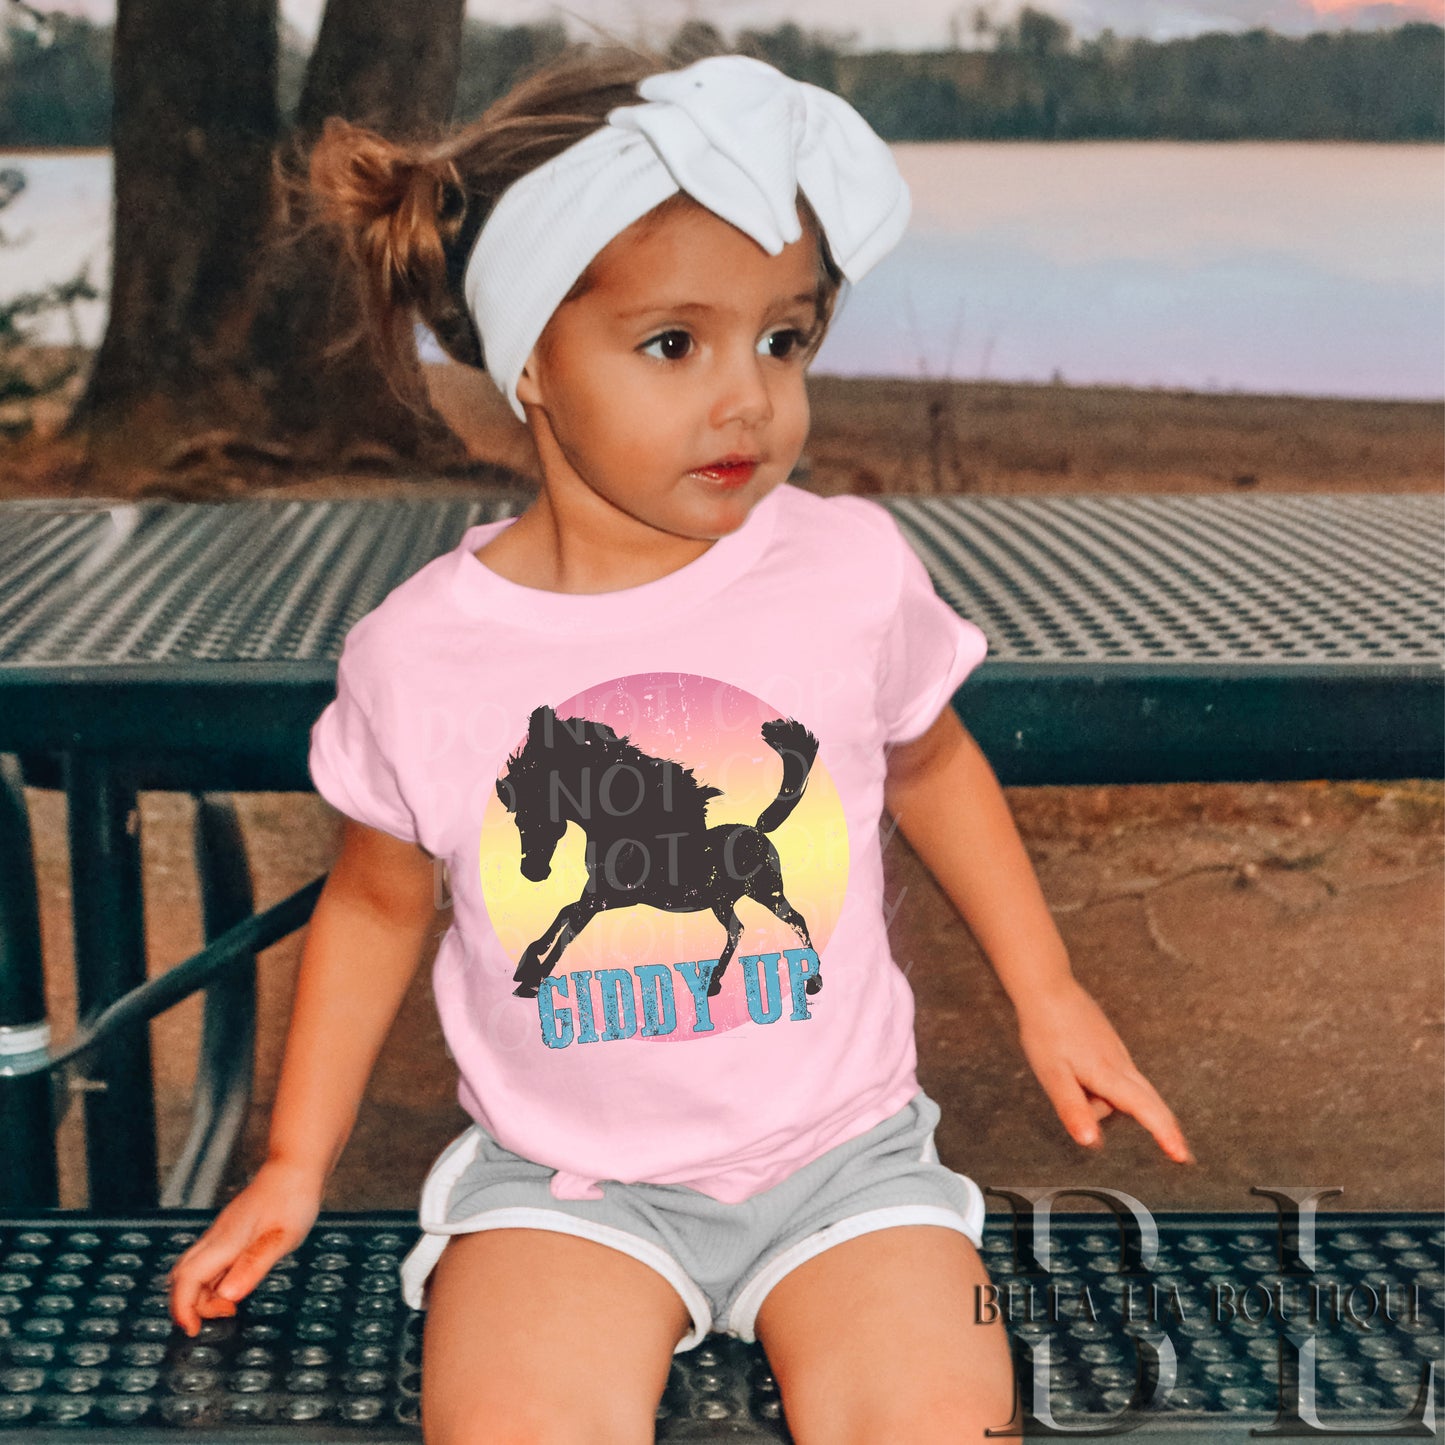 Giddy Up Toddler and Youth Tee - Bella Lia Boutique